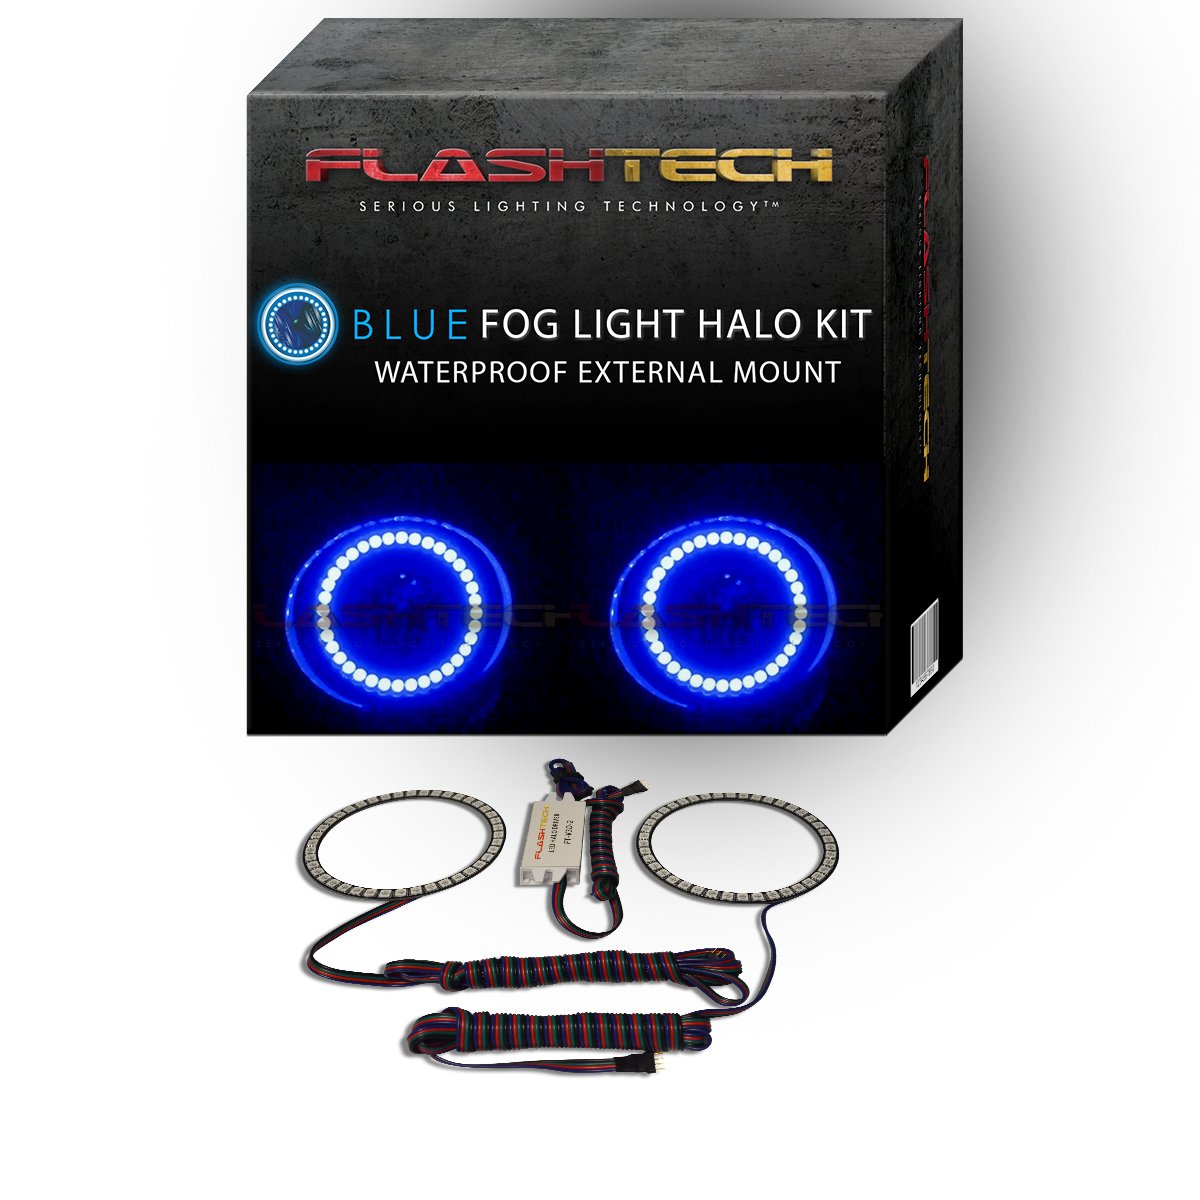 Ford-Freestyle-2005, 2006, 2007-LED-Halo-Fog Lights-Blue-No Remote-FO-FR0507-BF-WPE